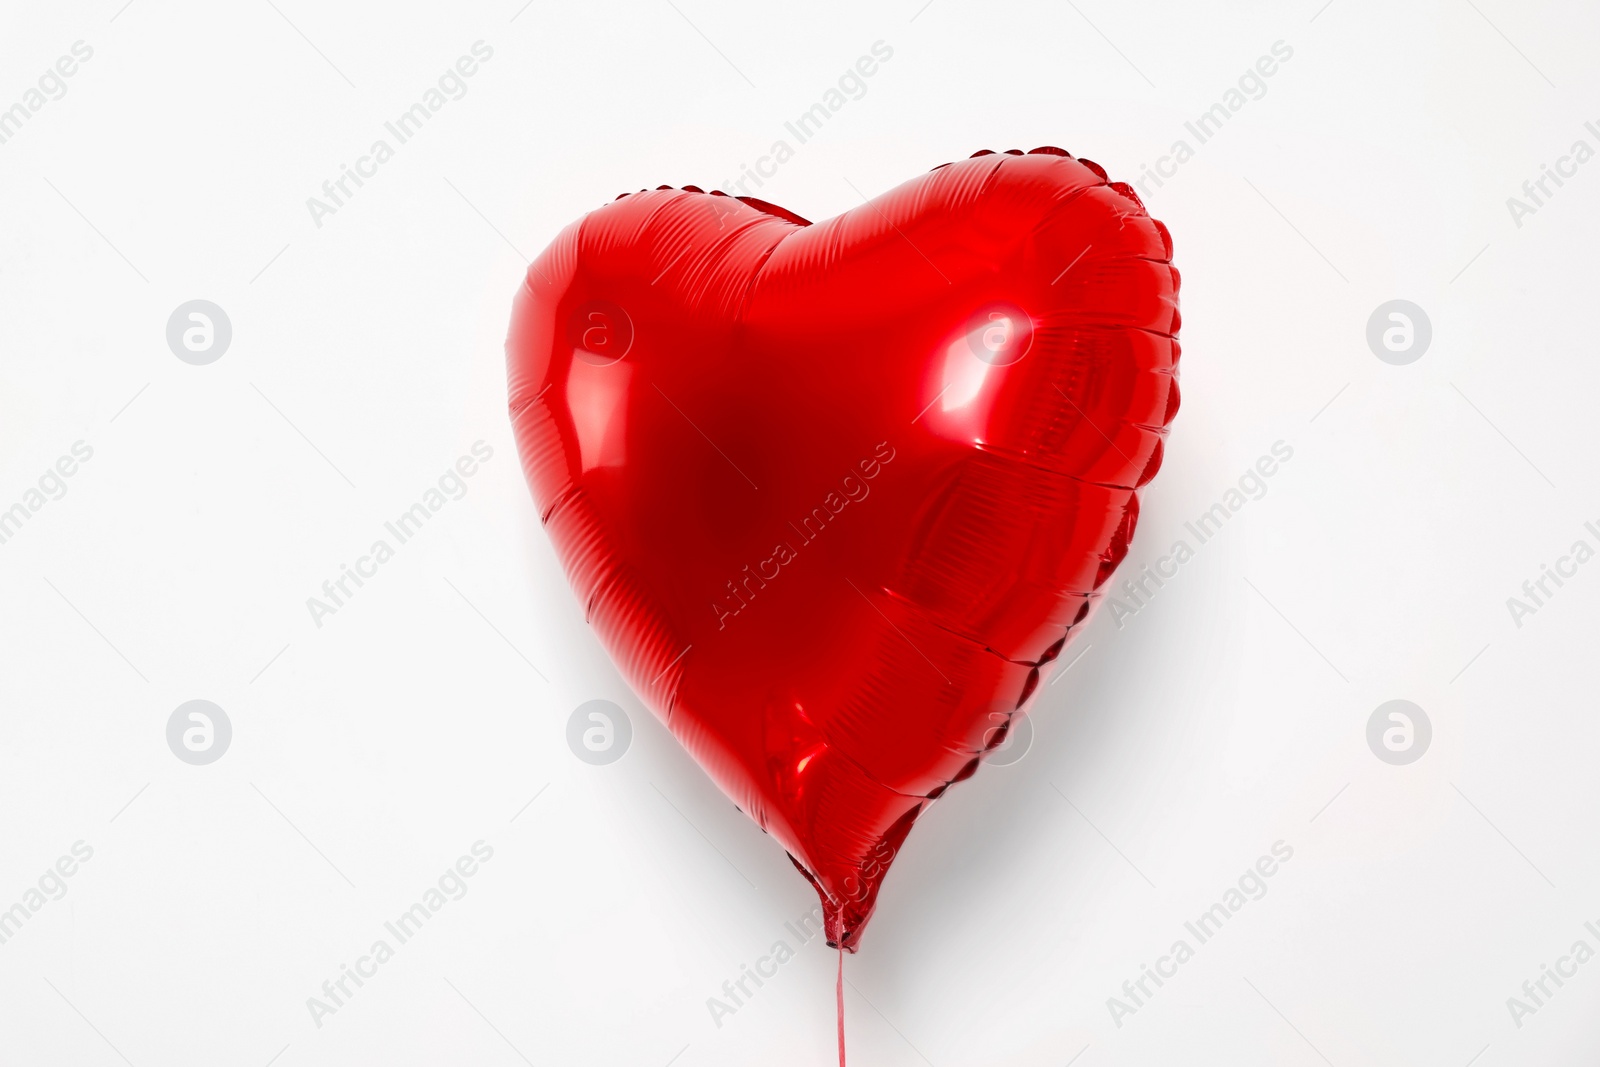 Photo of Red heart shaped balloon on white background